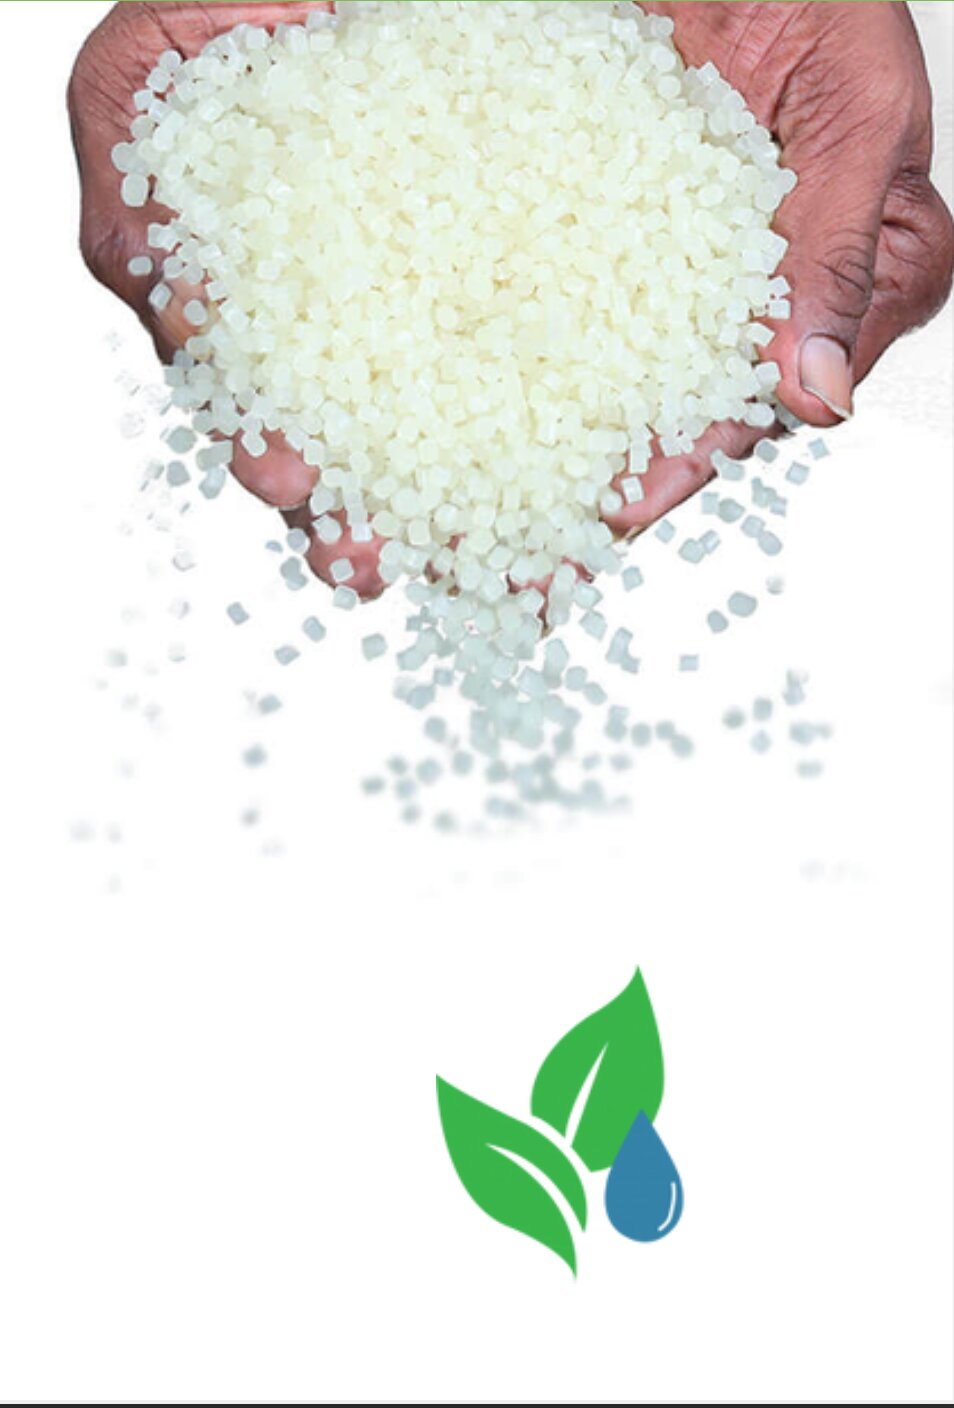 GreenPlast Pellets, which can turn into biodegradable alternative to plasticse